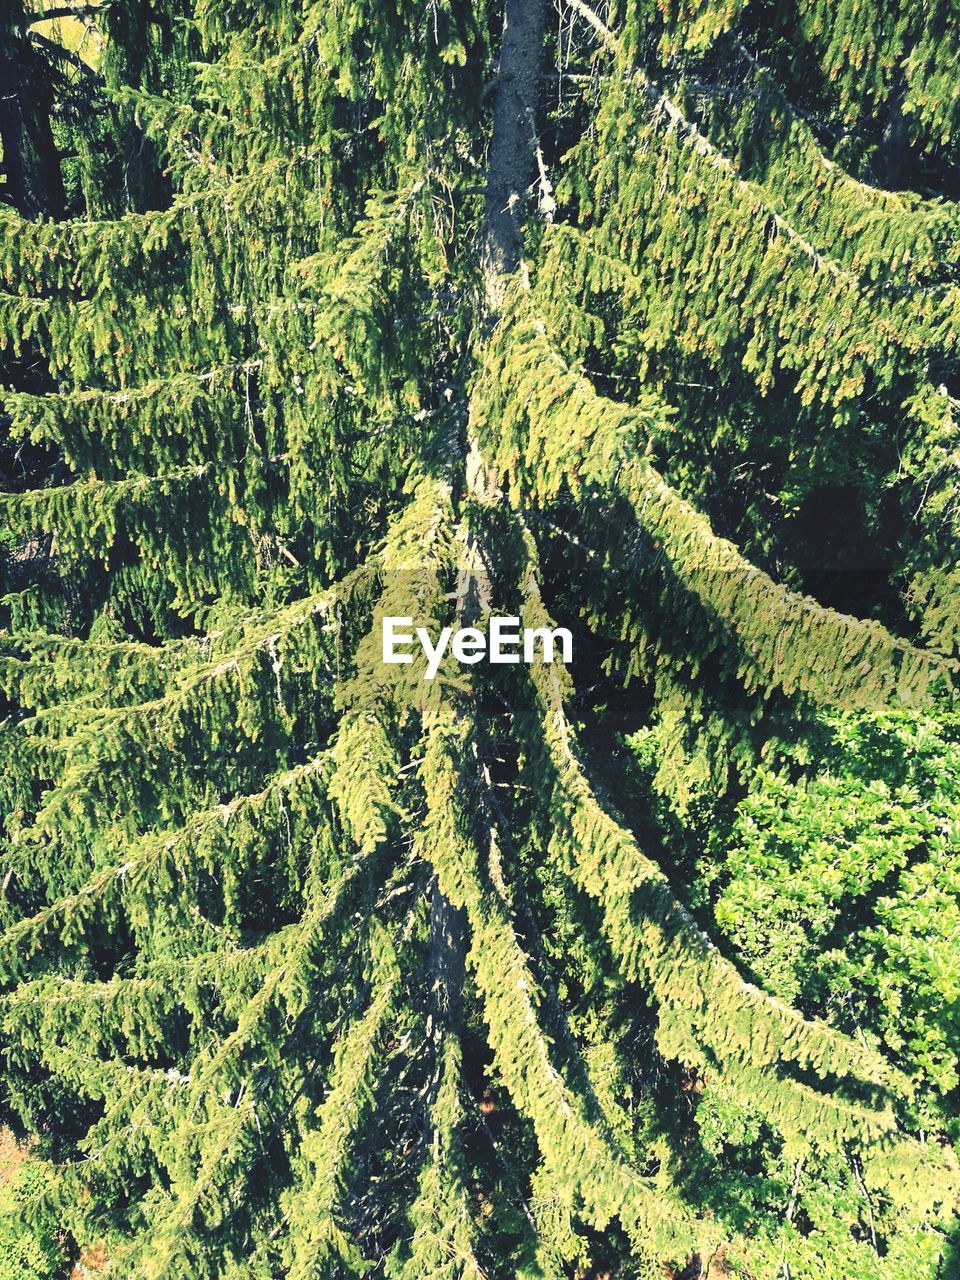 HIGH ANGLE VIEW OF TREES IN THE FOREST